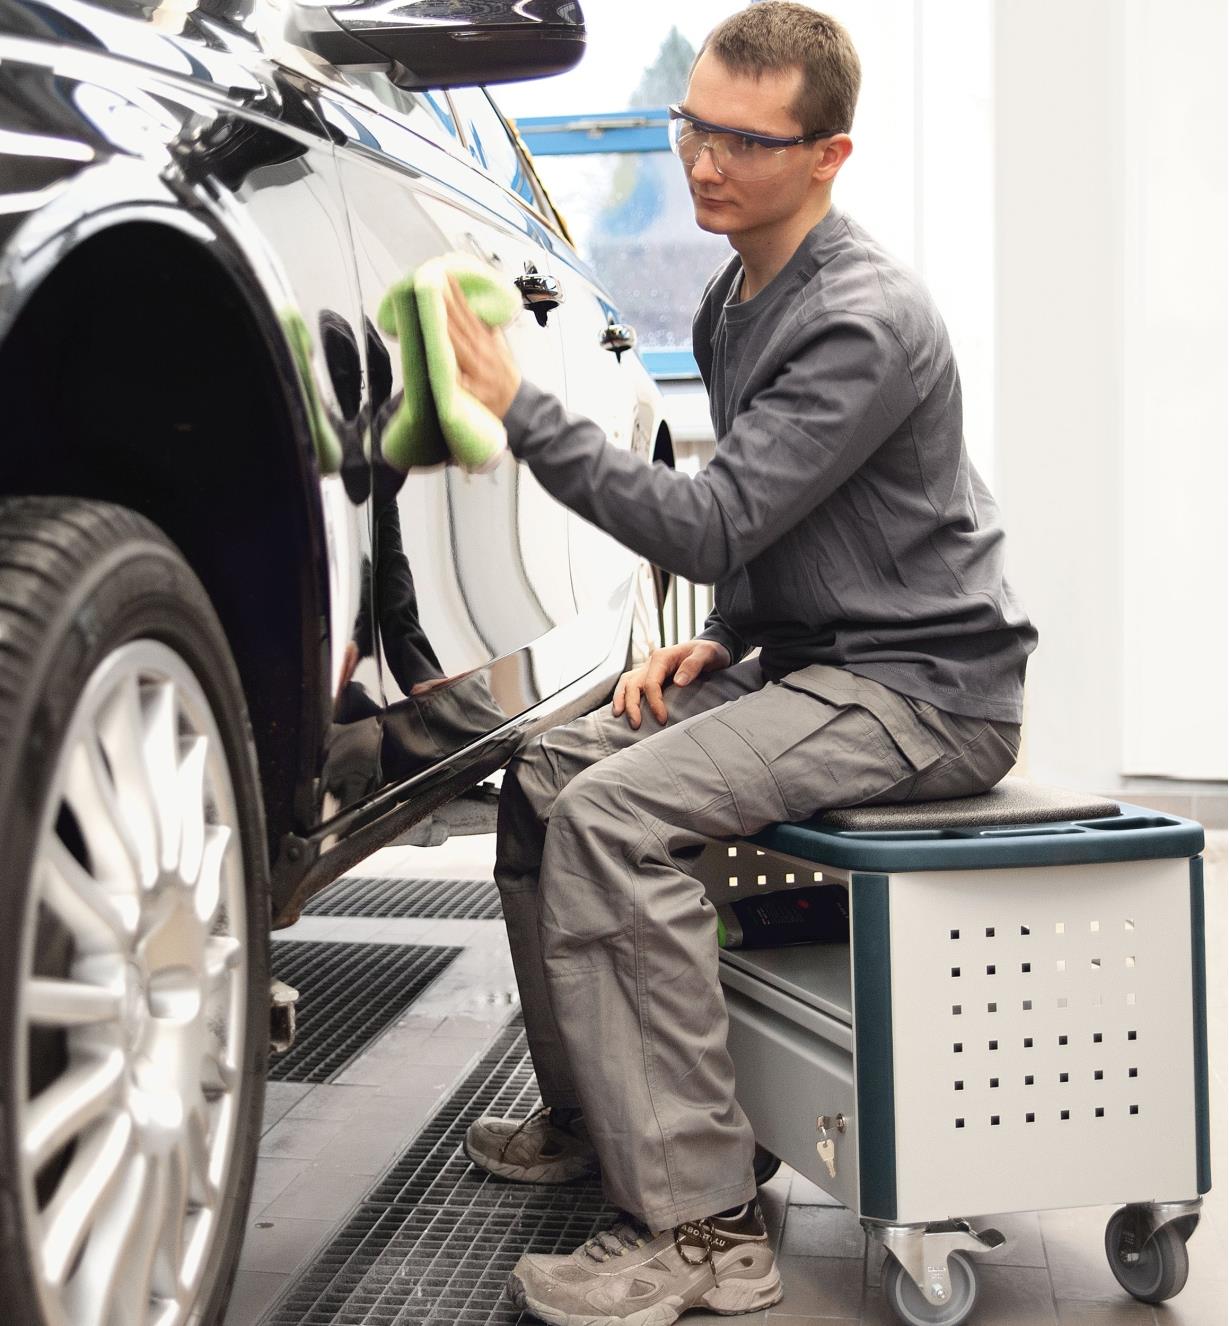 Man sitting on the MMFH 1000 multifunction stool while wiping a car